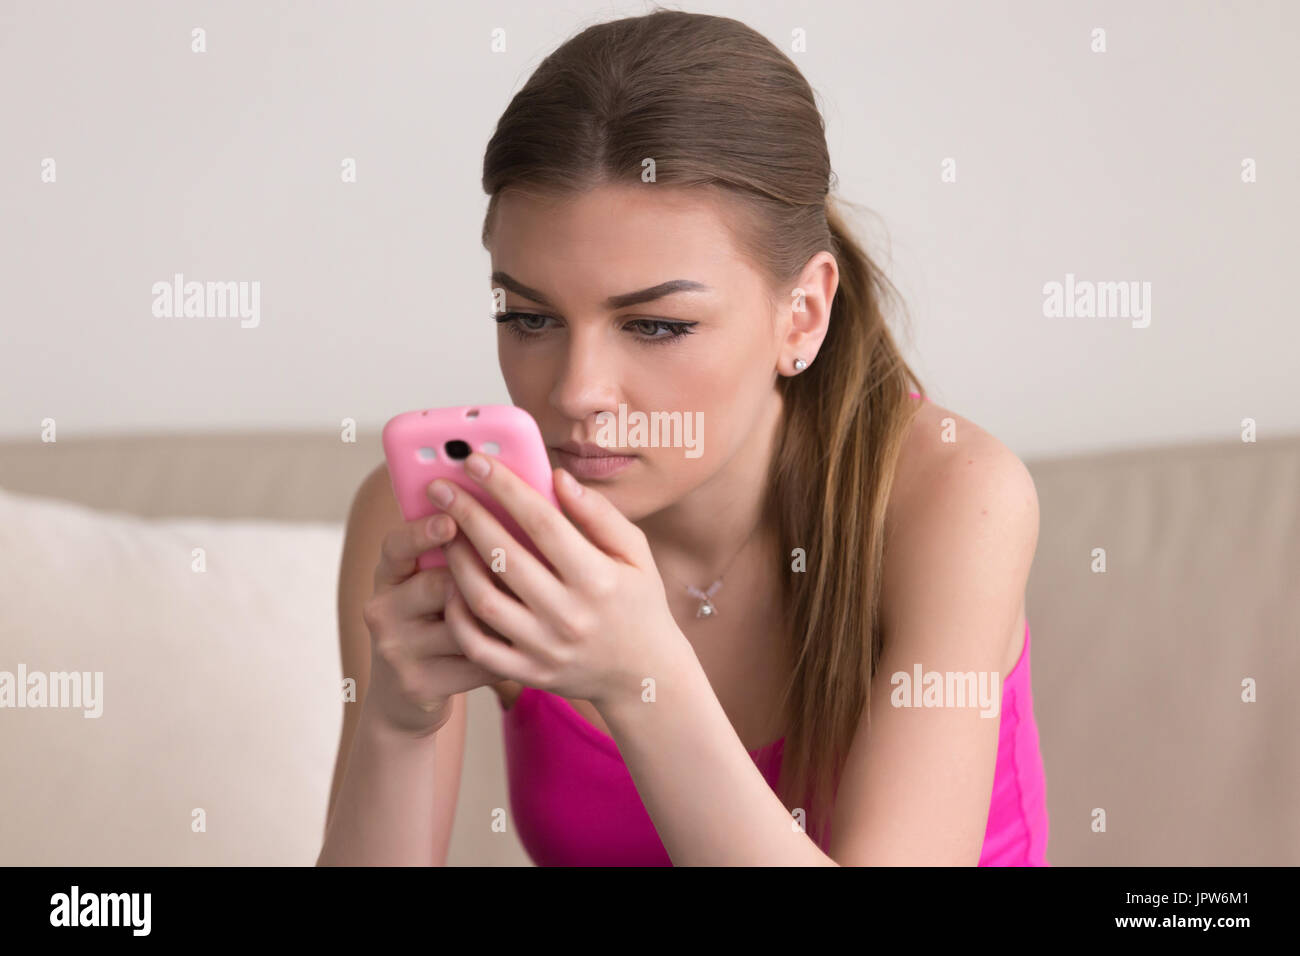 Serious young woman using cellphone at home Stock Photo